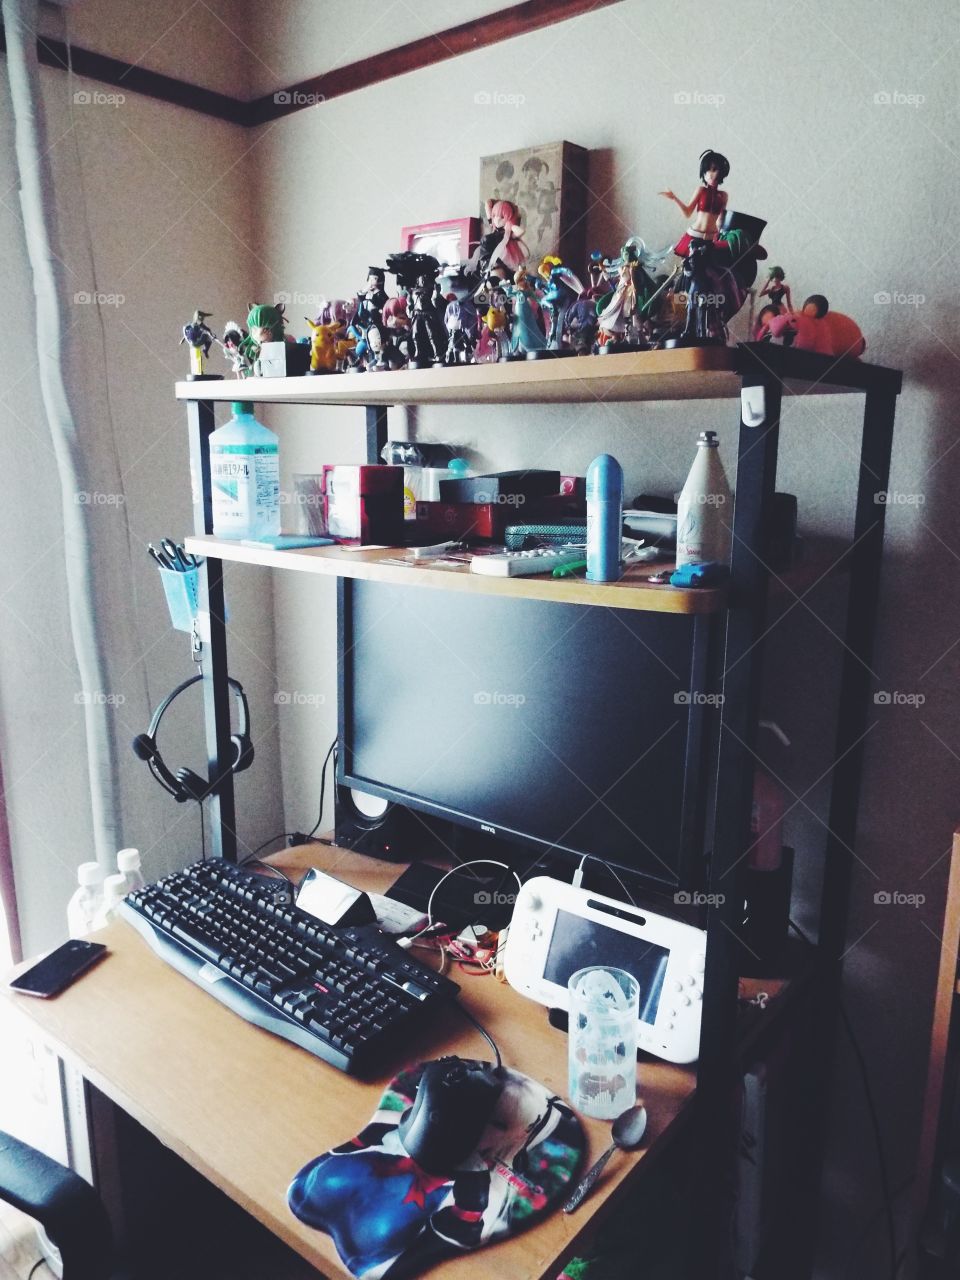 The desk of a teenager